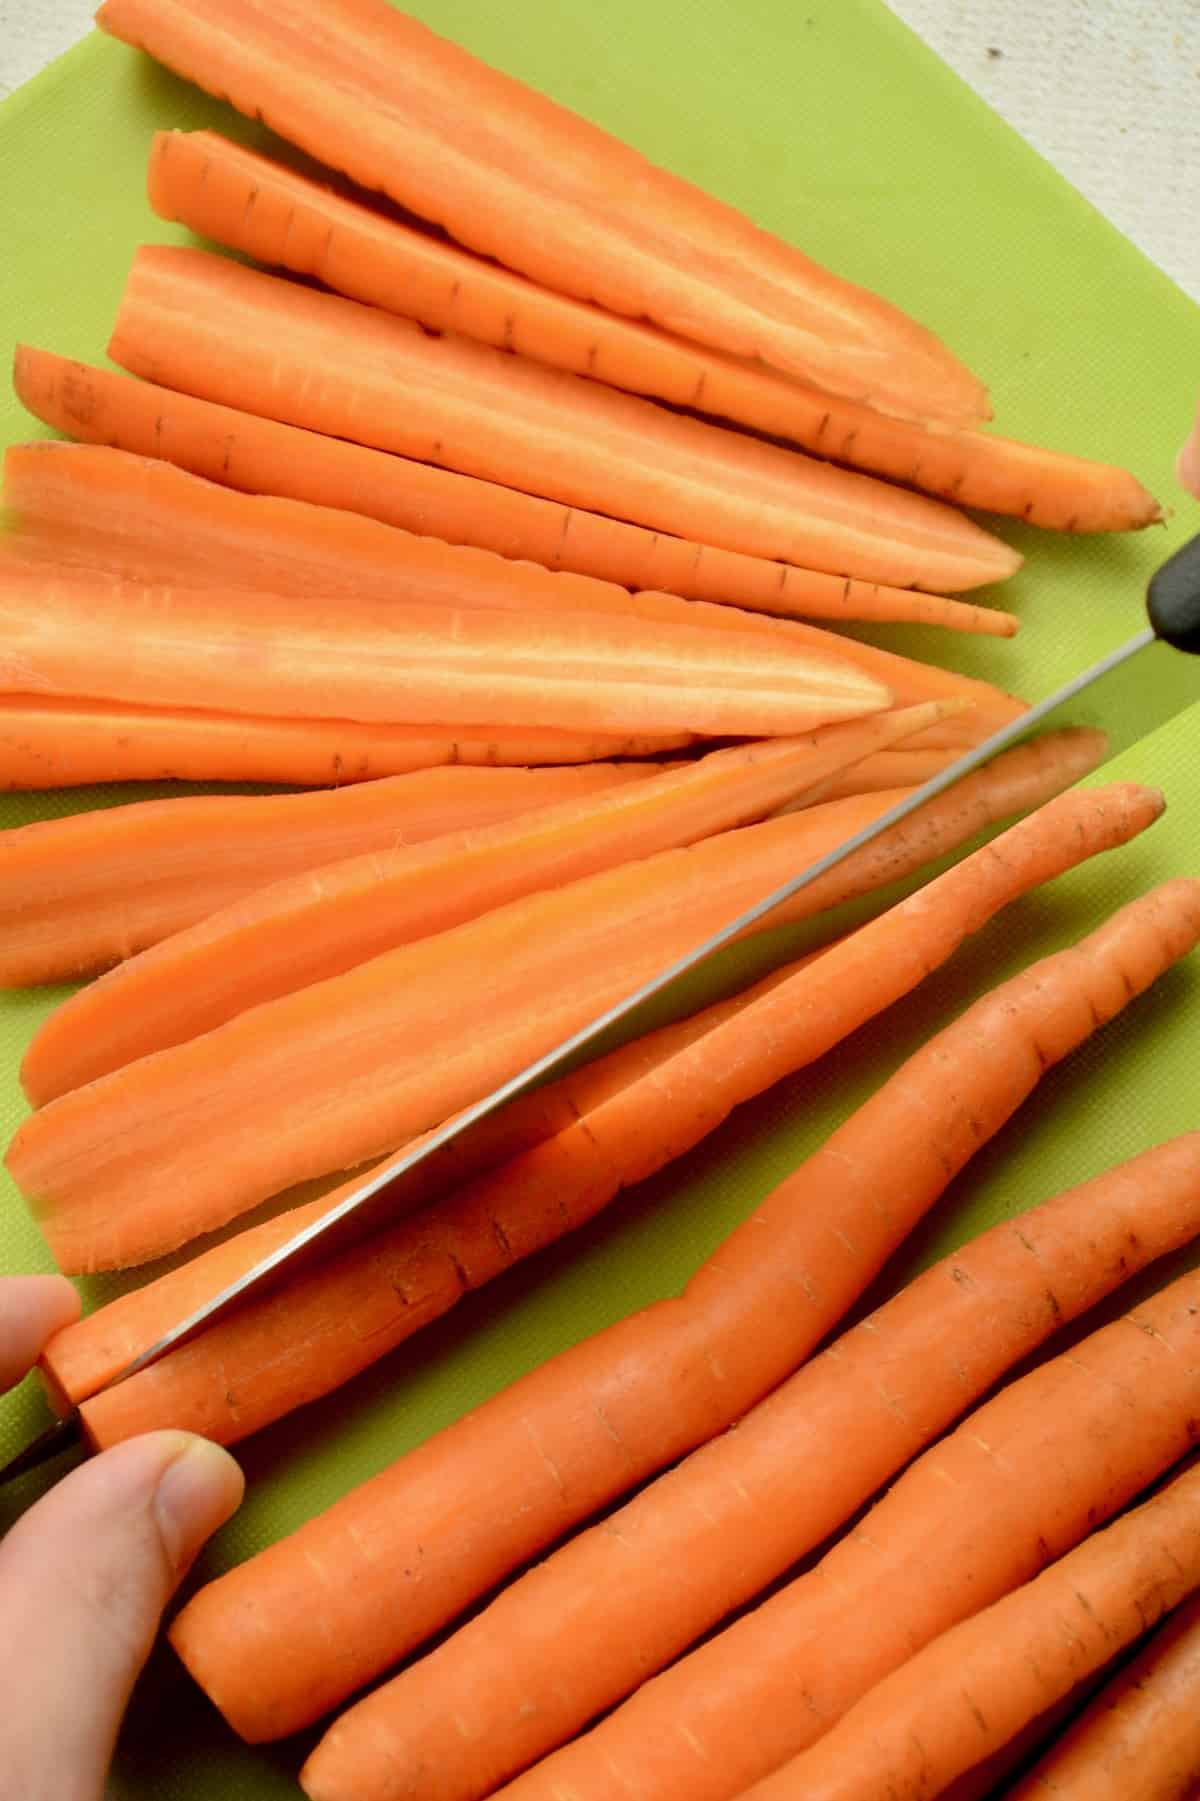 Carrots being chopped in half lengthwise.